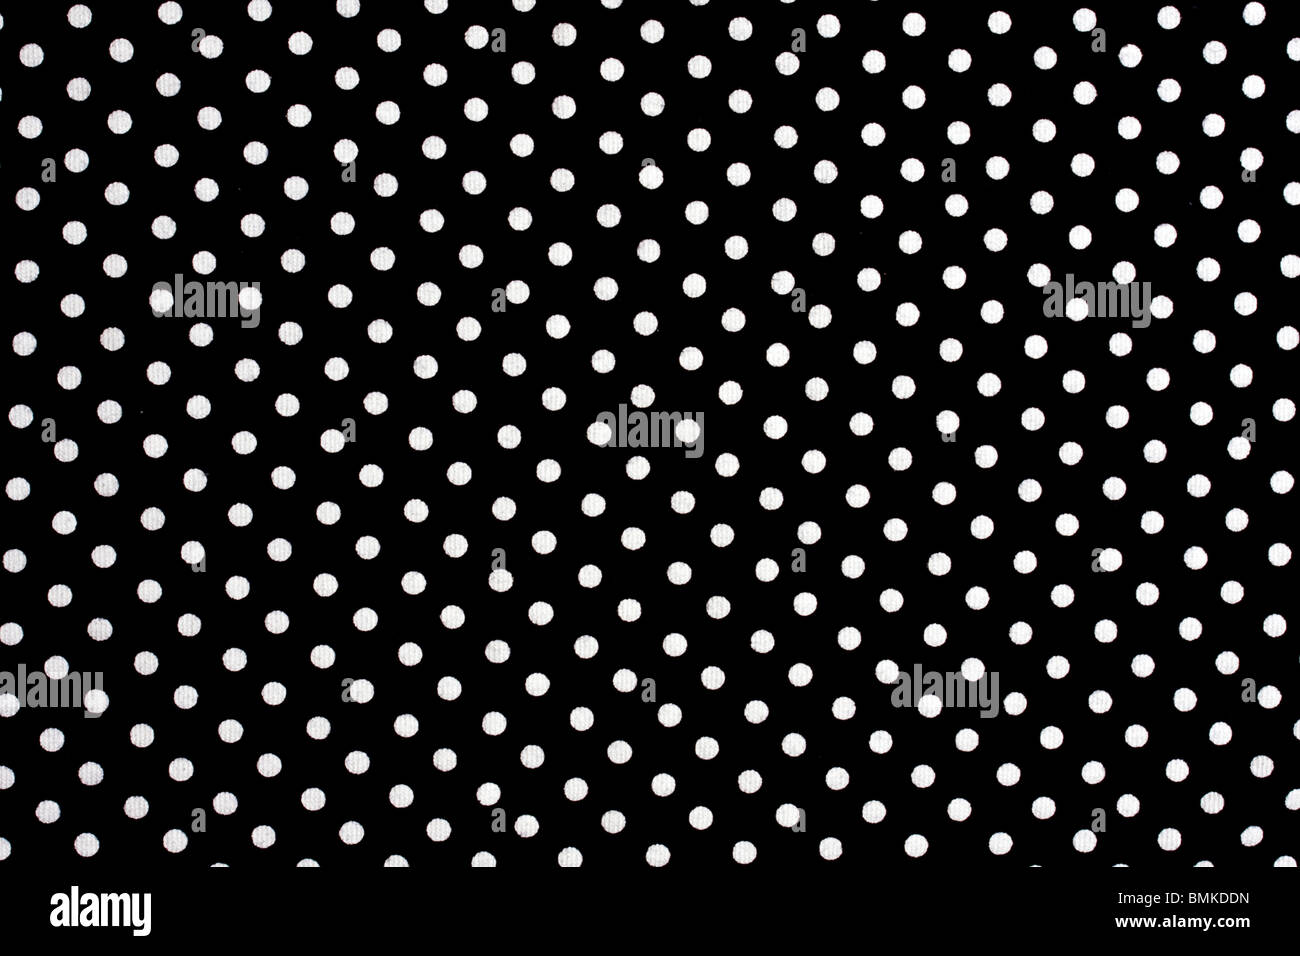 Black and white dots fabric background Stock Photo